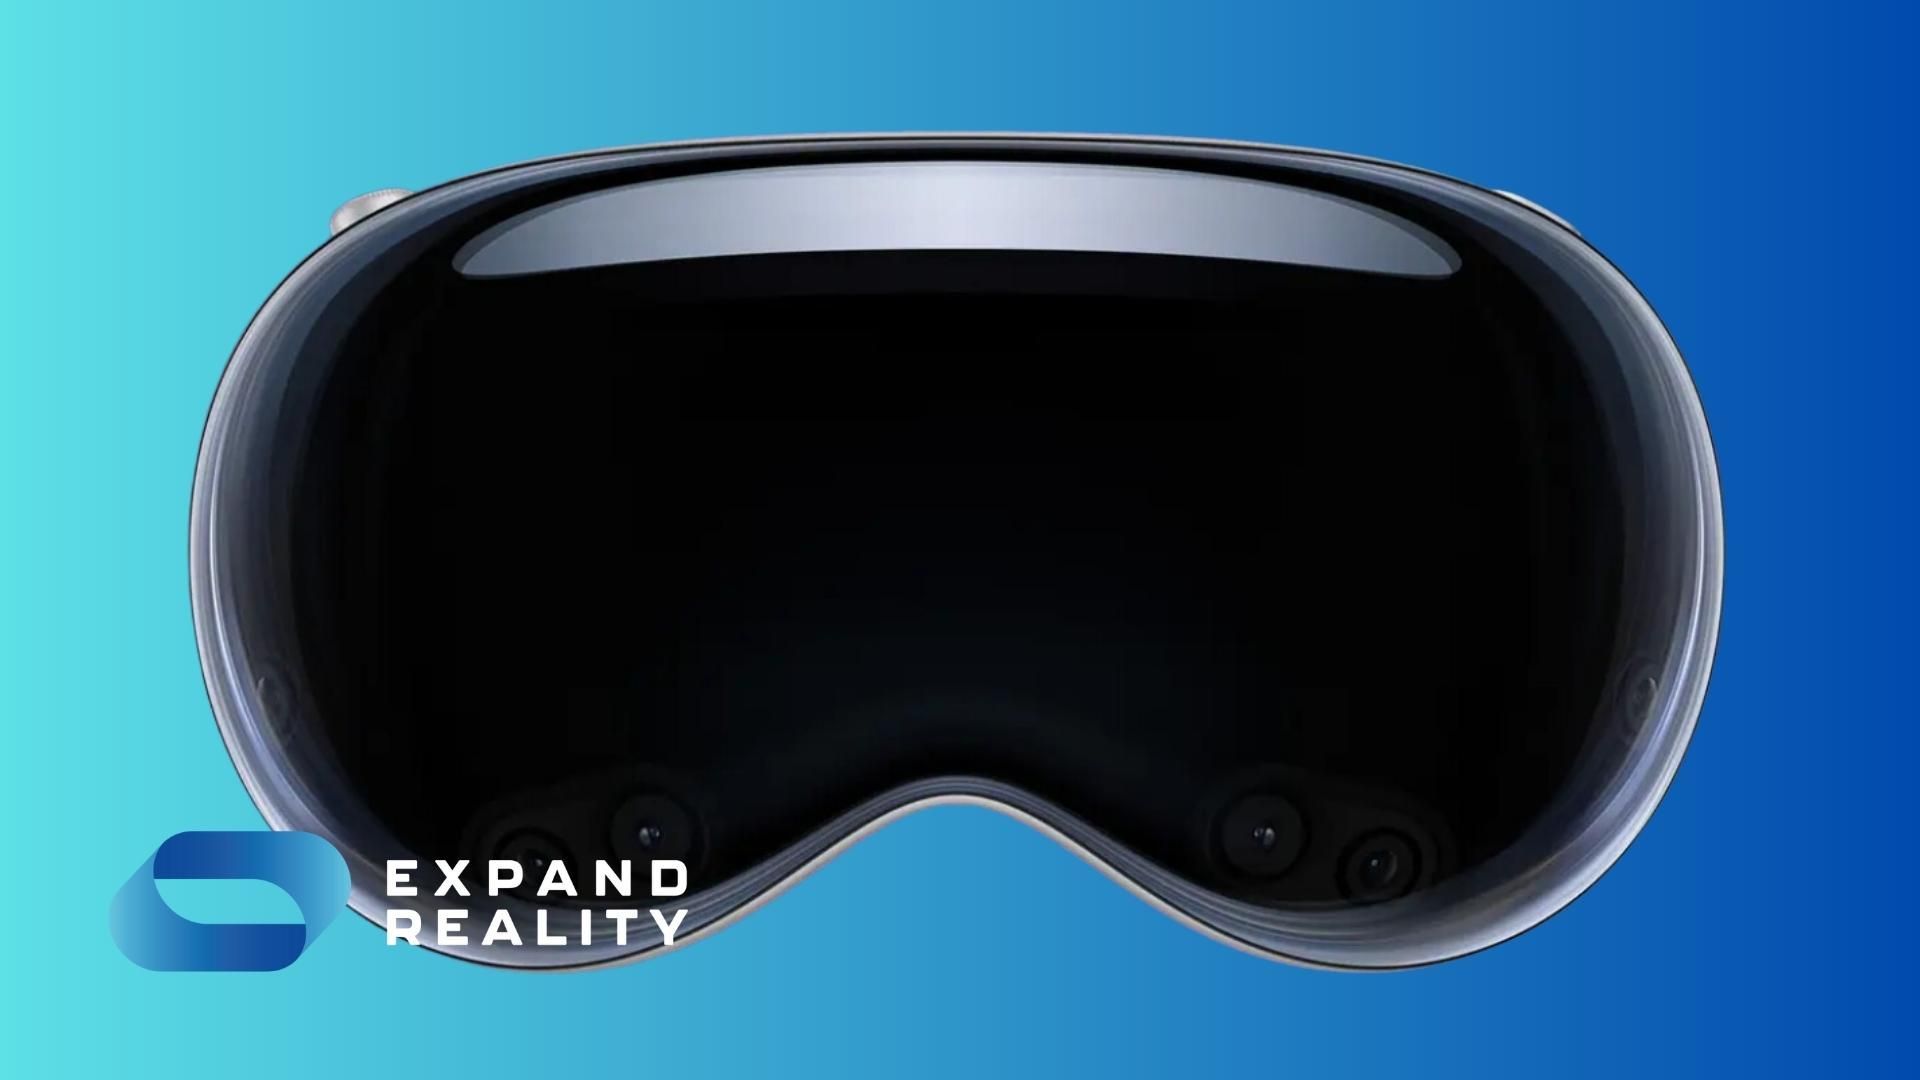 Apple Vision Pro is a revolution in wearable spatial computing. But is it a dedicated XR device – or the iPhone with bells on? Get the scoop in our article.